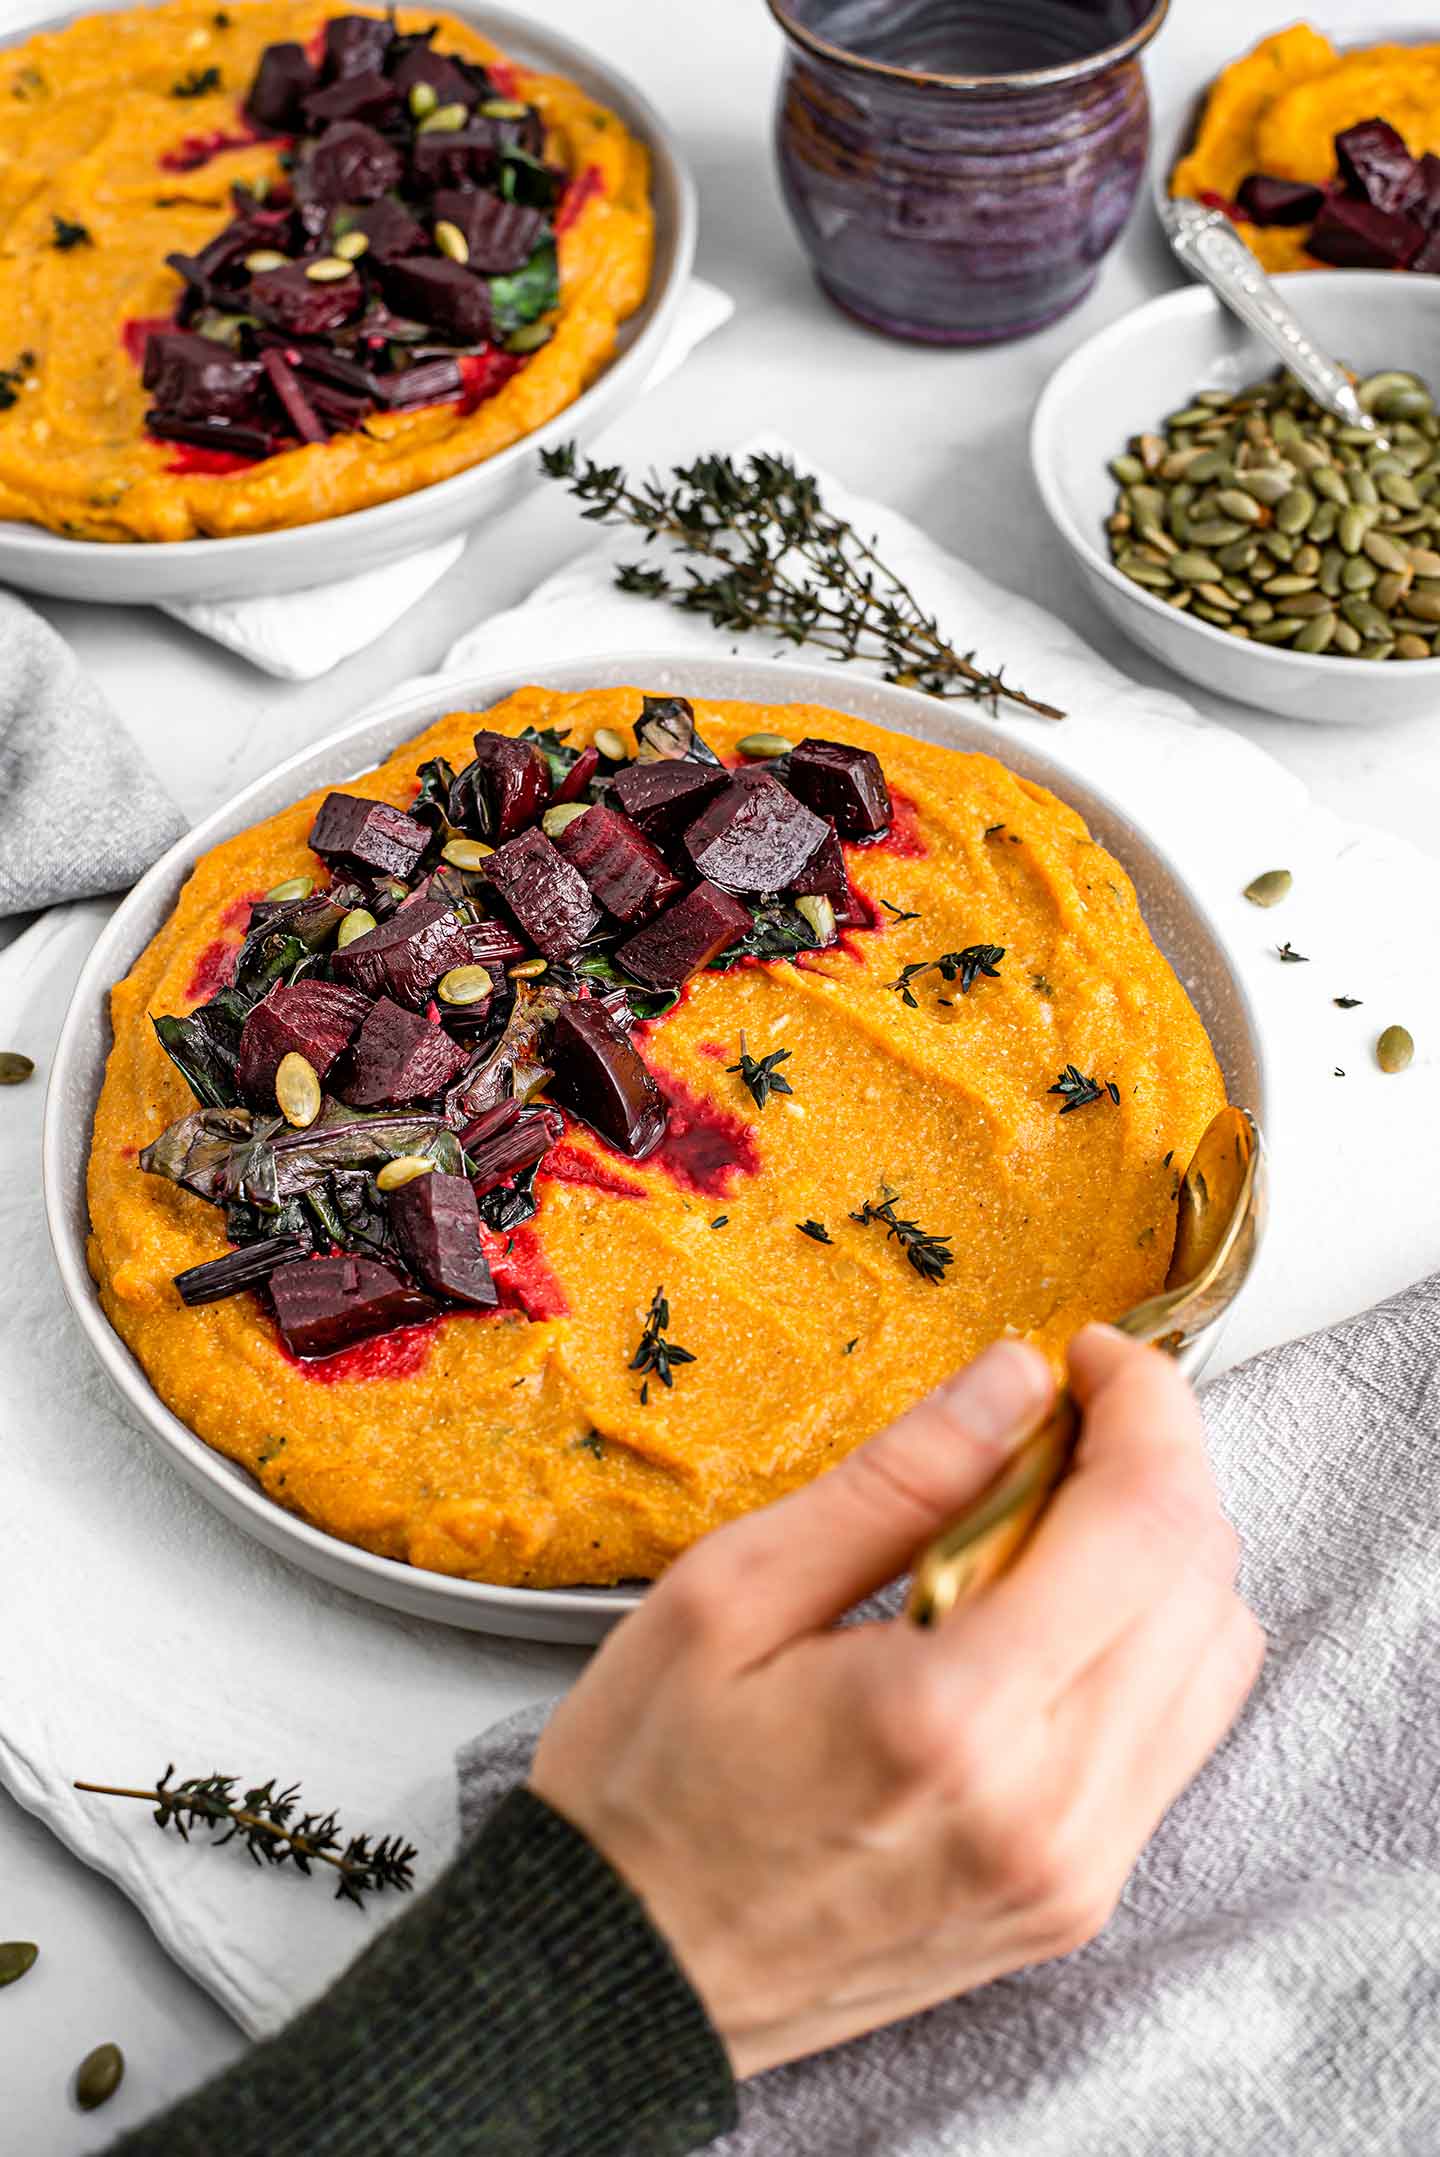 Side view of a hand with a spoon, scooping into a plate of festive pumpkin beet polenta. Another dish stands in the background, and pumpkin seeds fill a small bowl.